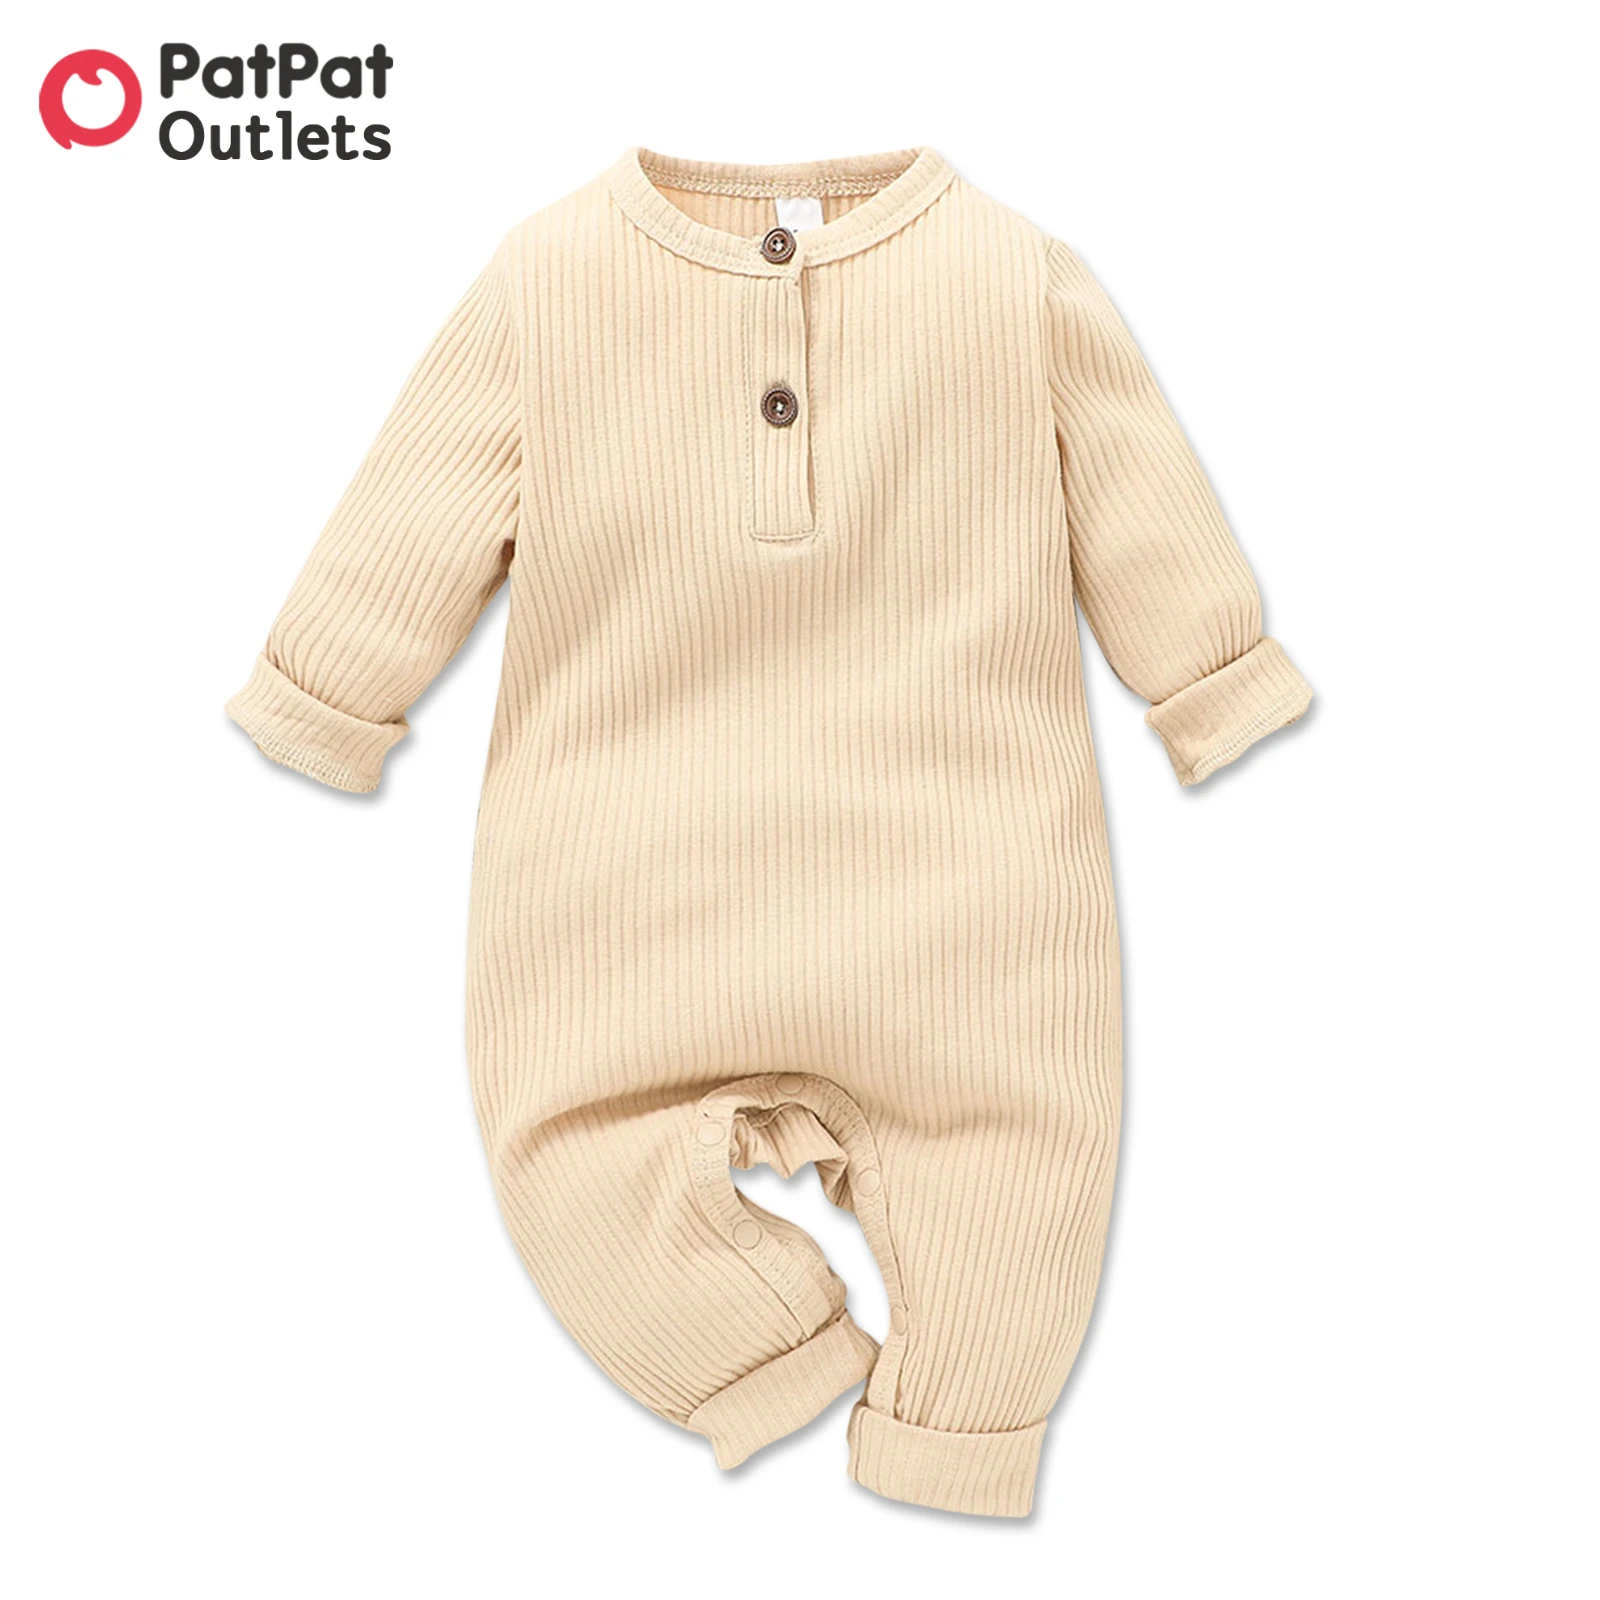 

PatPat Baby Boy/Girl Romper 95% Cotton Ribbed Long-sleeve Button Up Jumpsuit Newborn Clothings Bodysuit Outfits